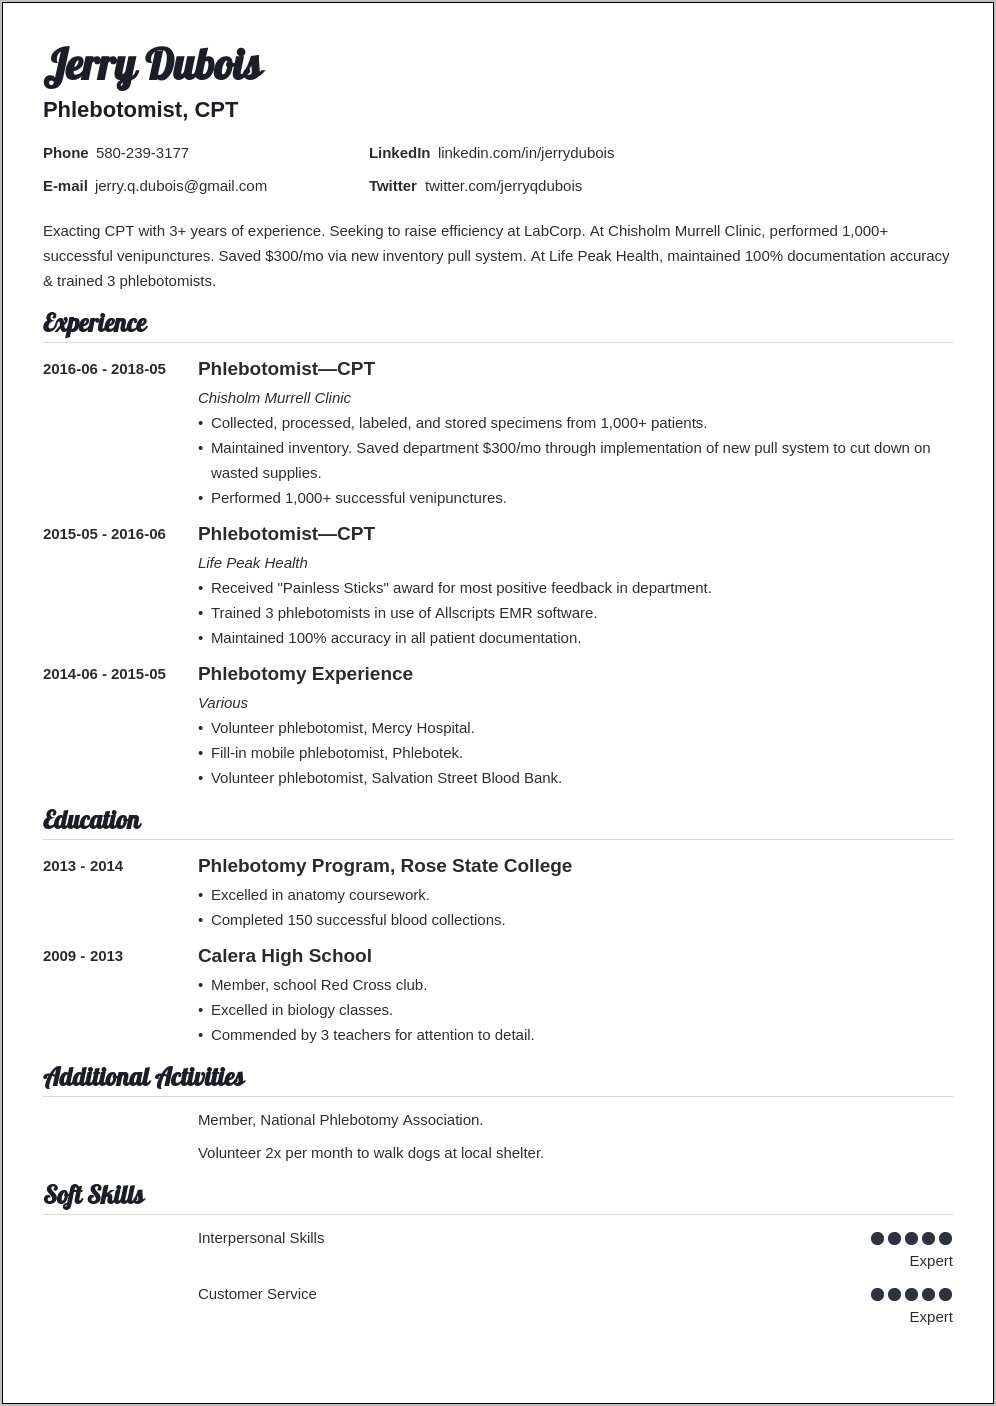 Sample Of Ekg Resume With No Experience